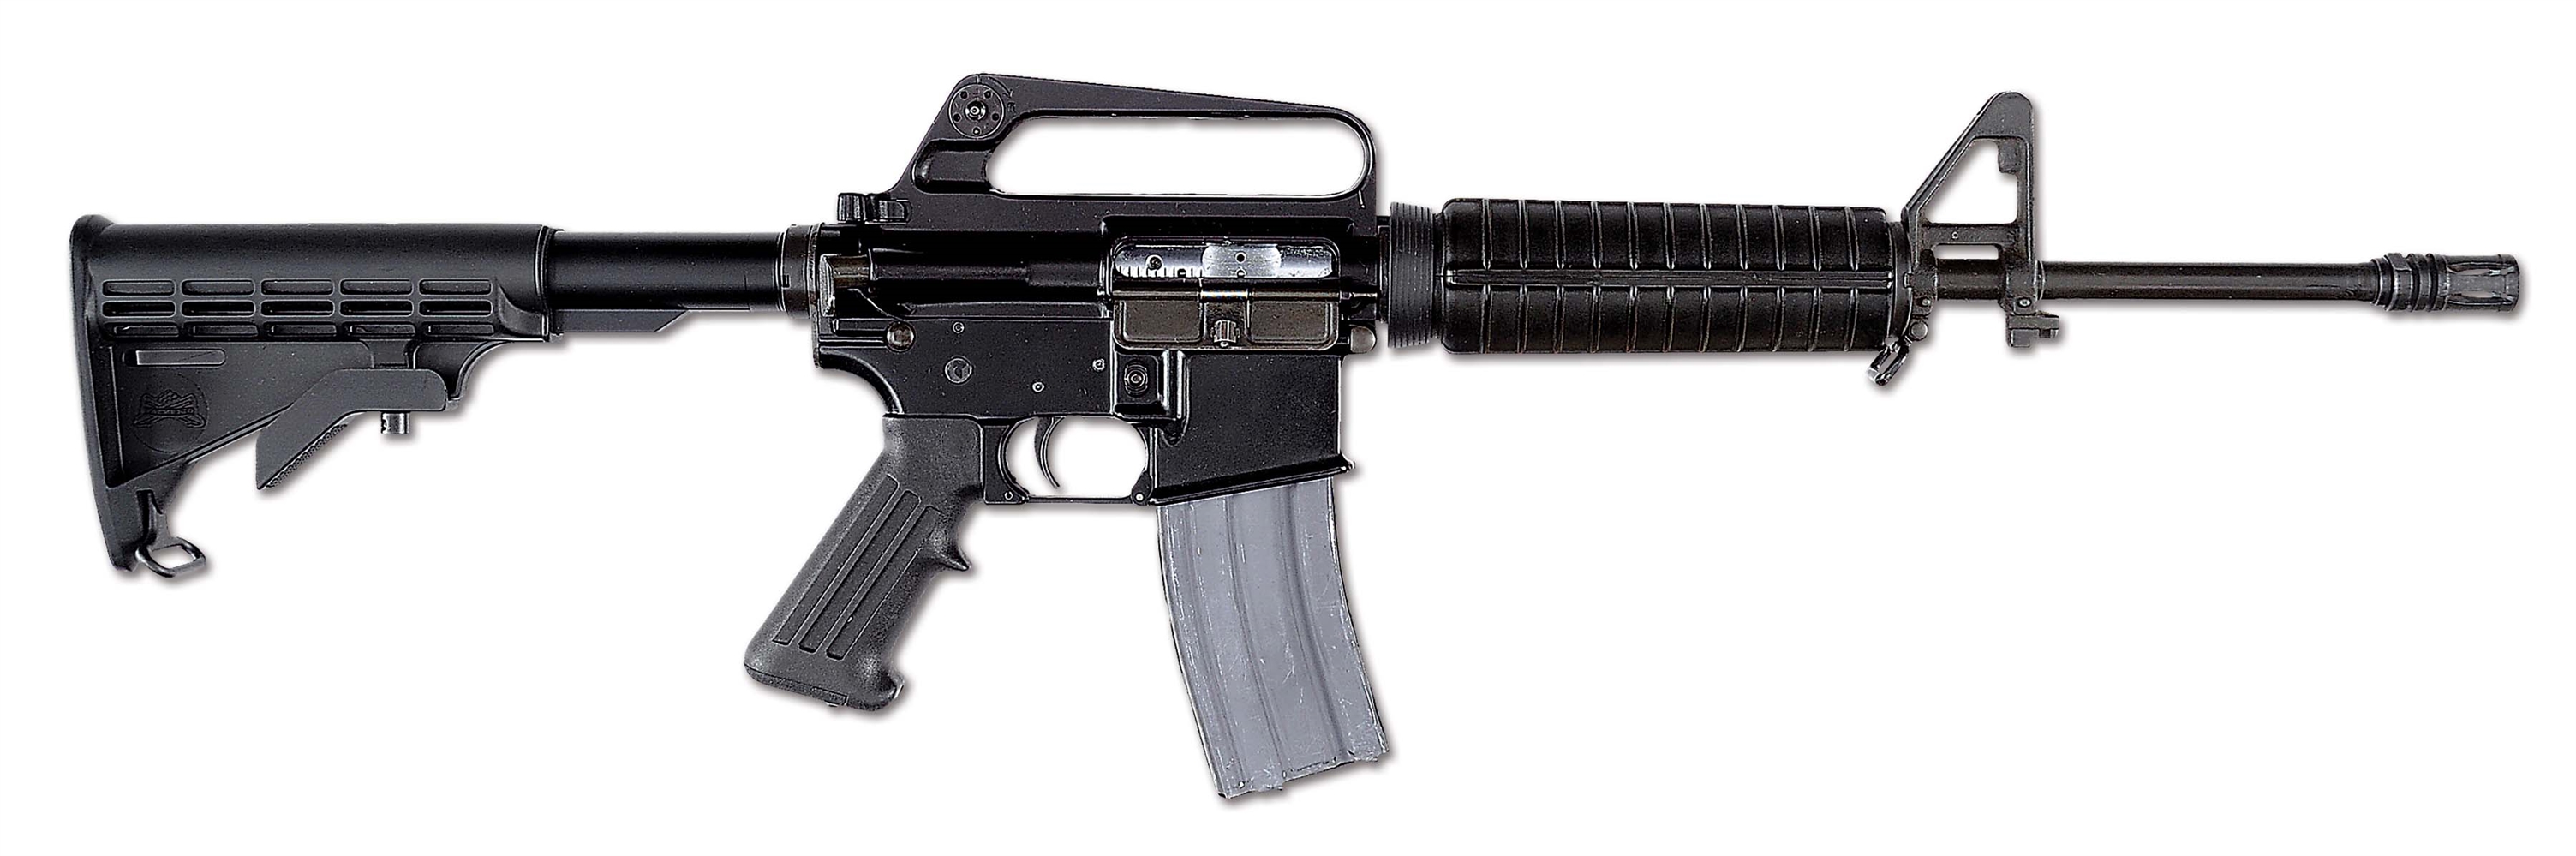 (N) FINE OLYMPIC ARMS REGISTERED M16 CLONE WITH TELESCOPING STOCK (FULLY TRANSFERABLE).